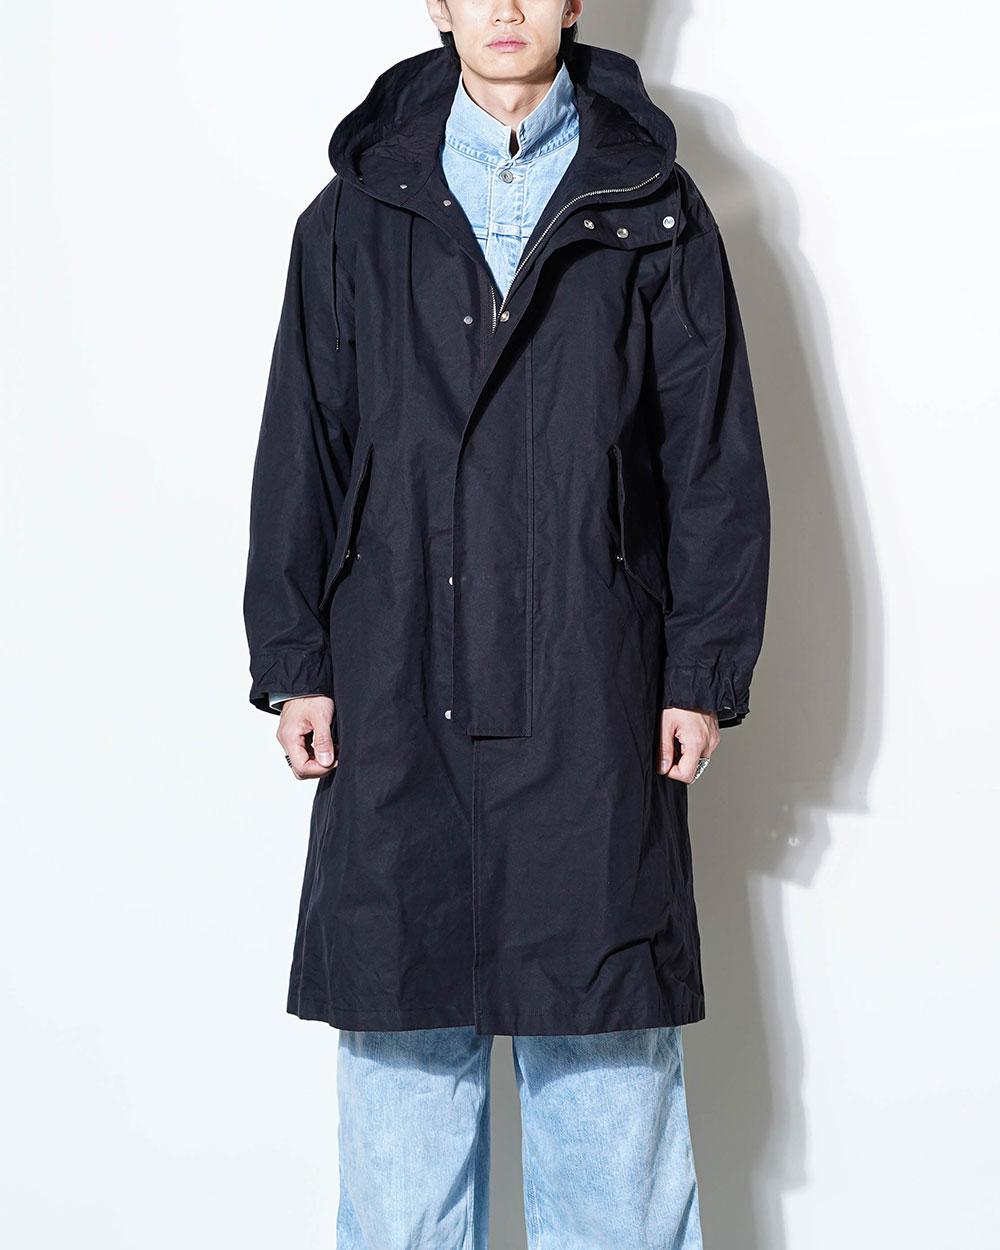 Heavy All Weather Cloth City Cruise Parka (Black)